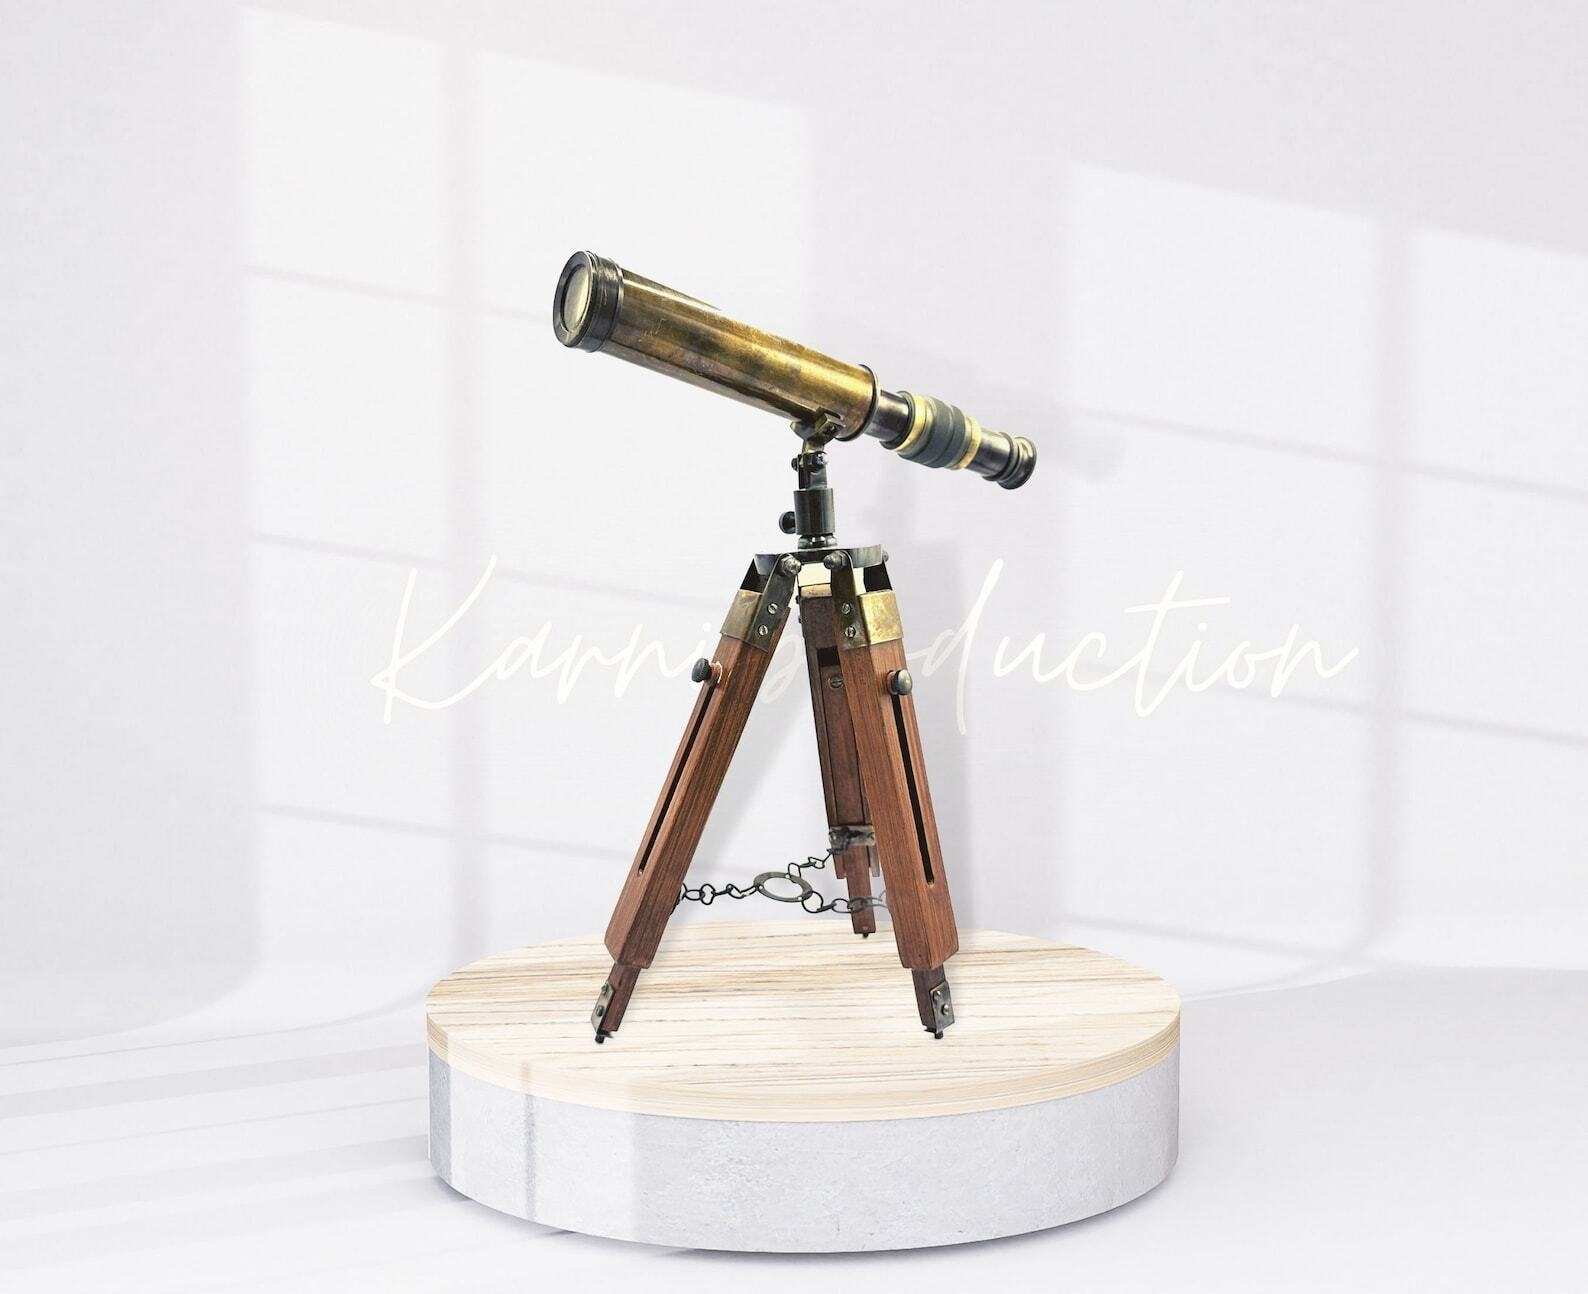 Antique Telescope With Tripod Wooden Stand Single Barrel Adjustable Spyglass